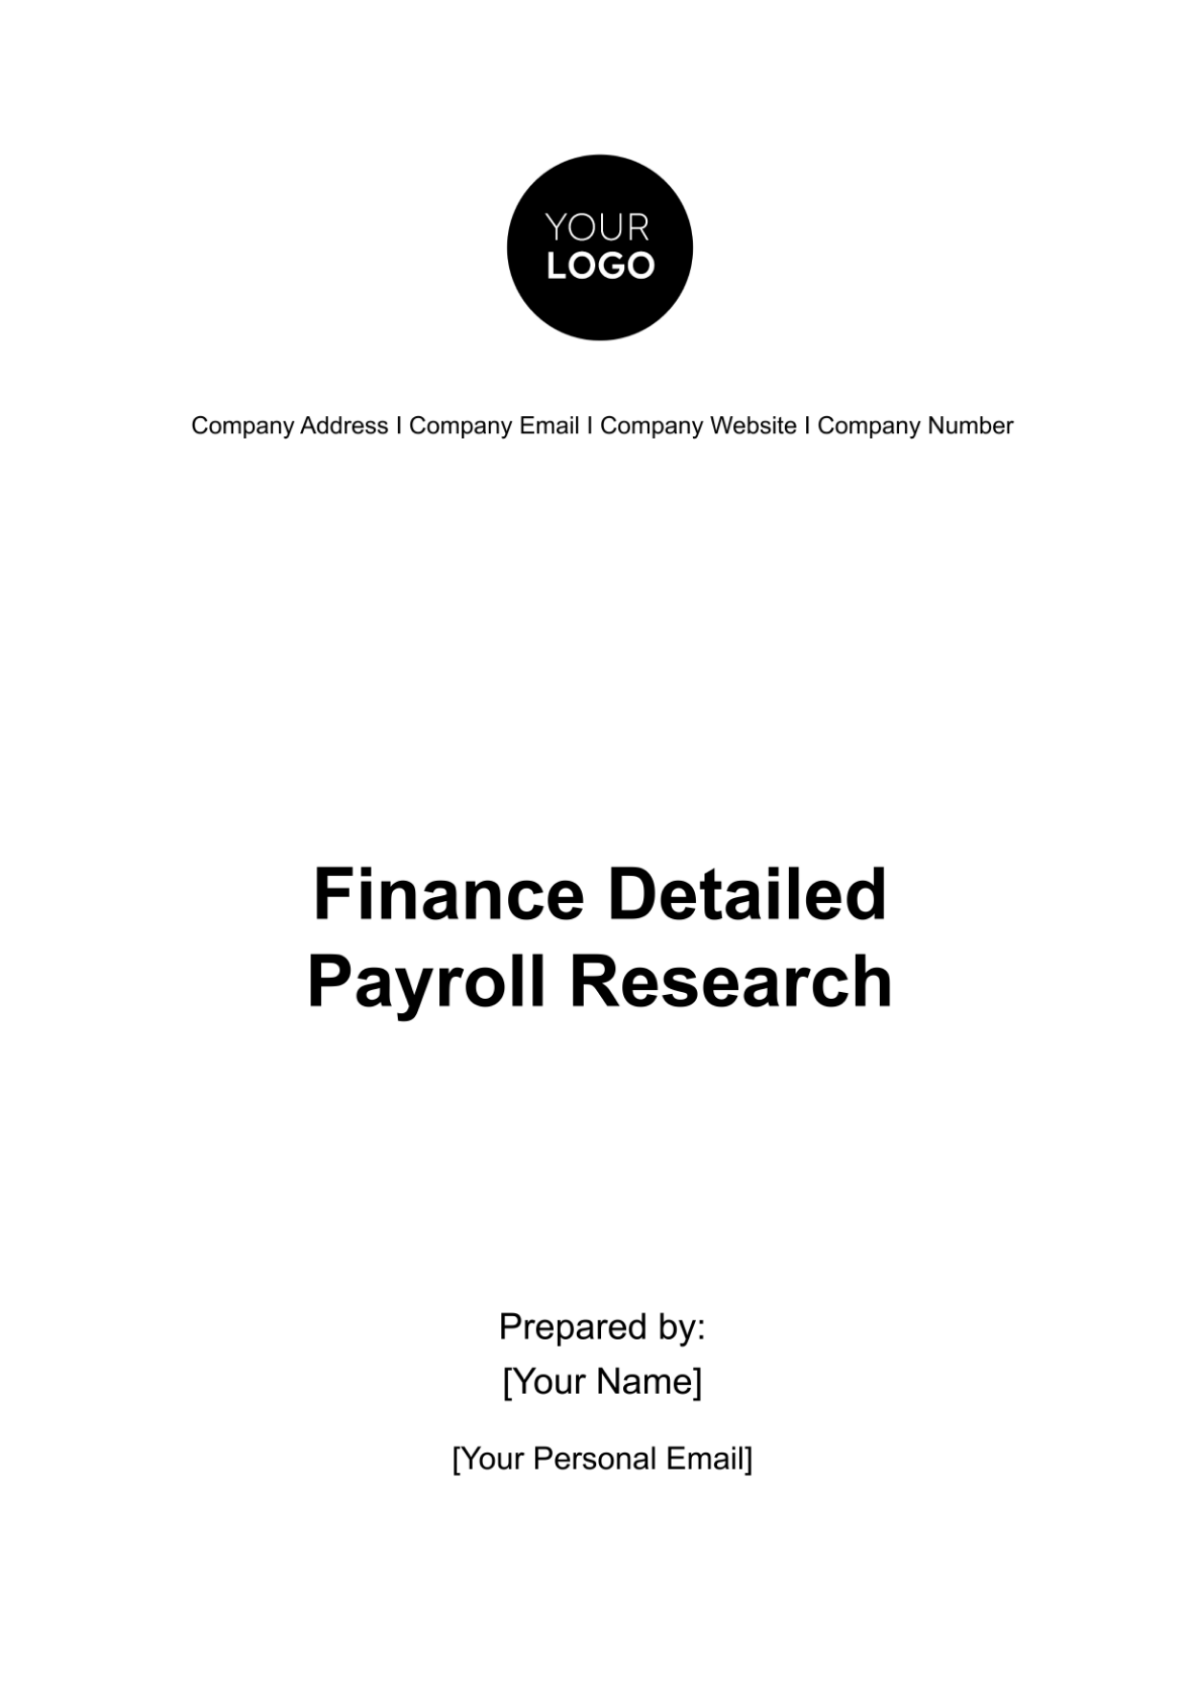 Finance Detailed Payroll Research Template